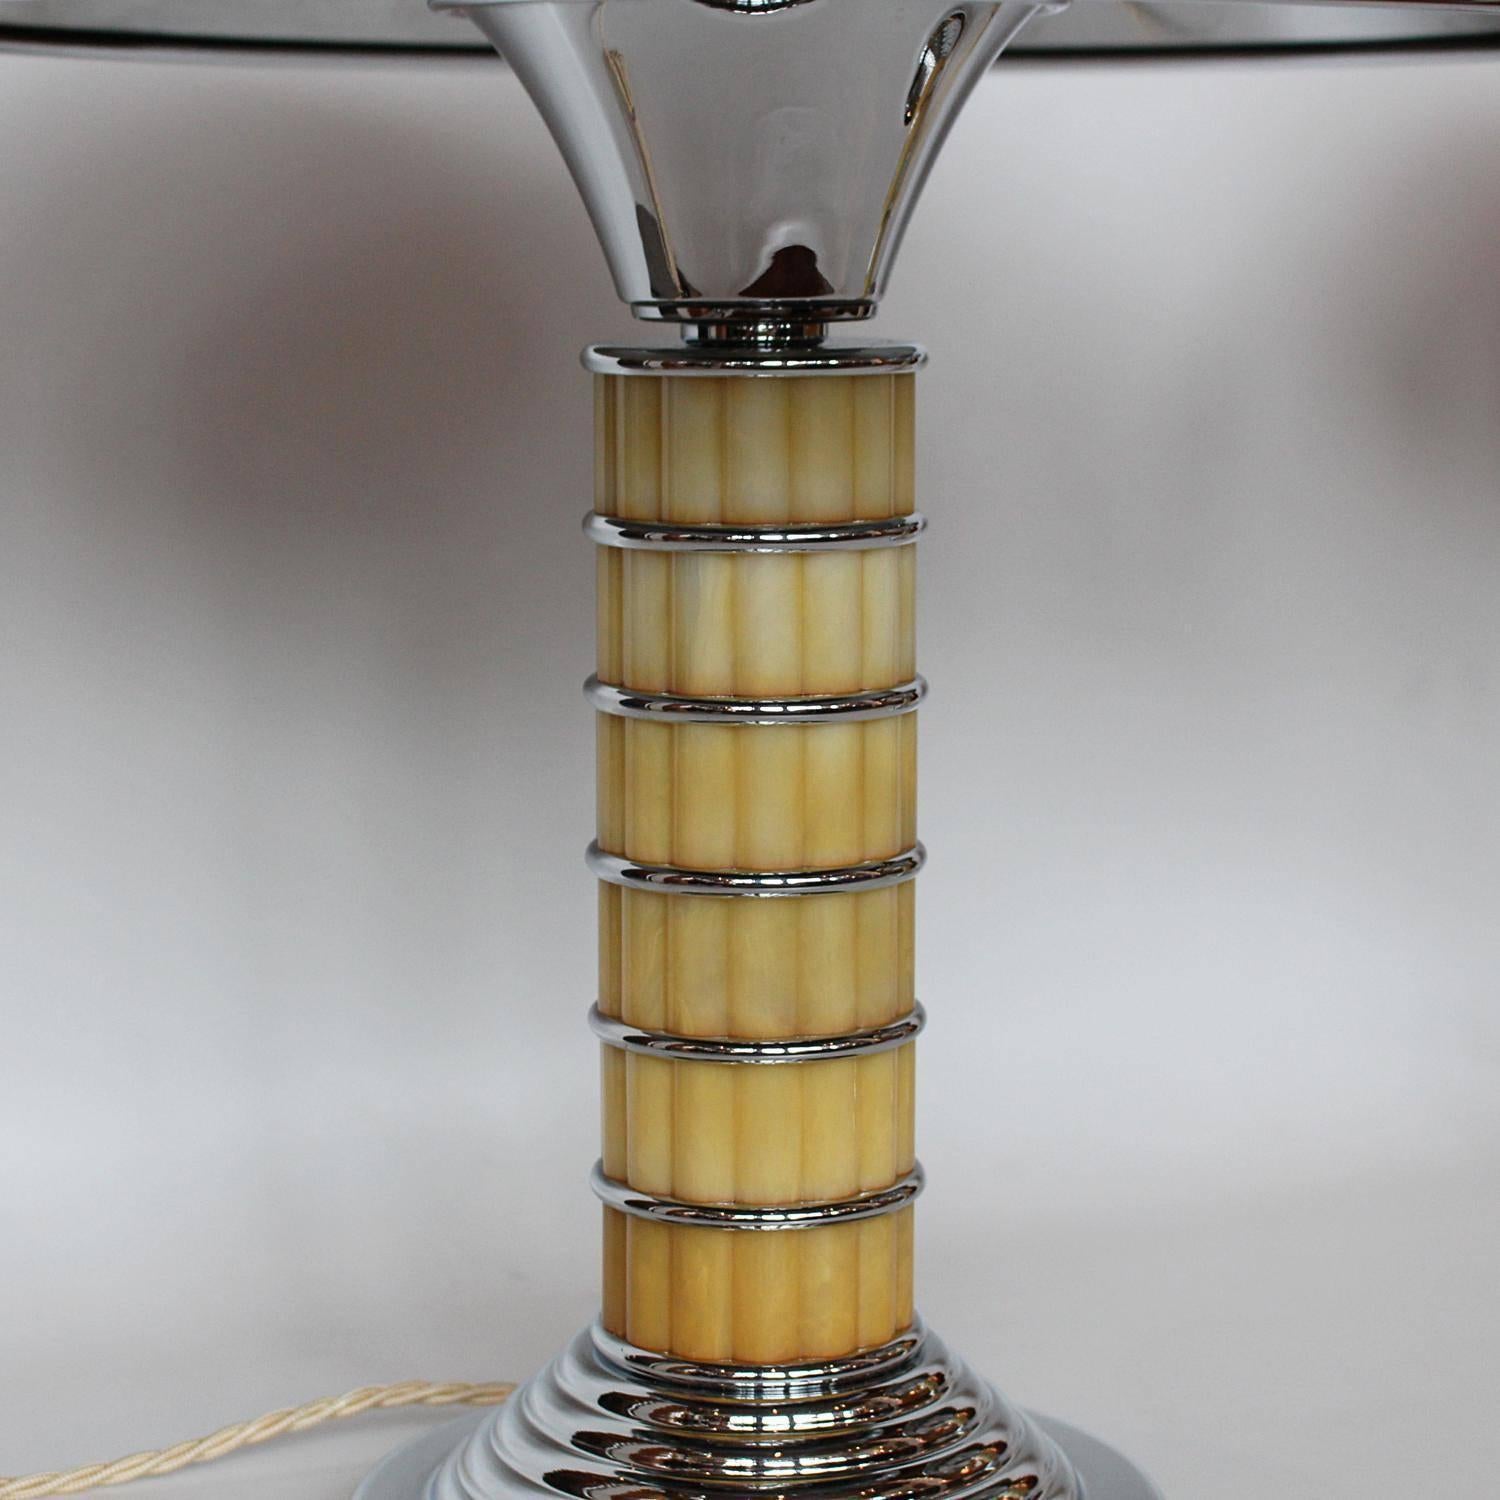 A pair of Art Deco table lamps with domed shades. Reeded, golden bakelite stems banded with chromed metal. Stepped metal bases. Bakelite finials to top.

Fully refurbished, re-wired and re-chromed, replacement shades.

Dimensions: H 45cm, W of